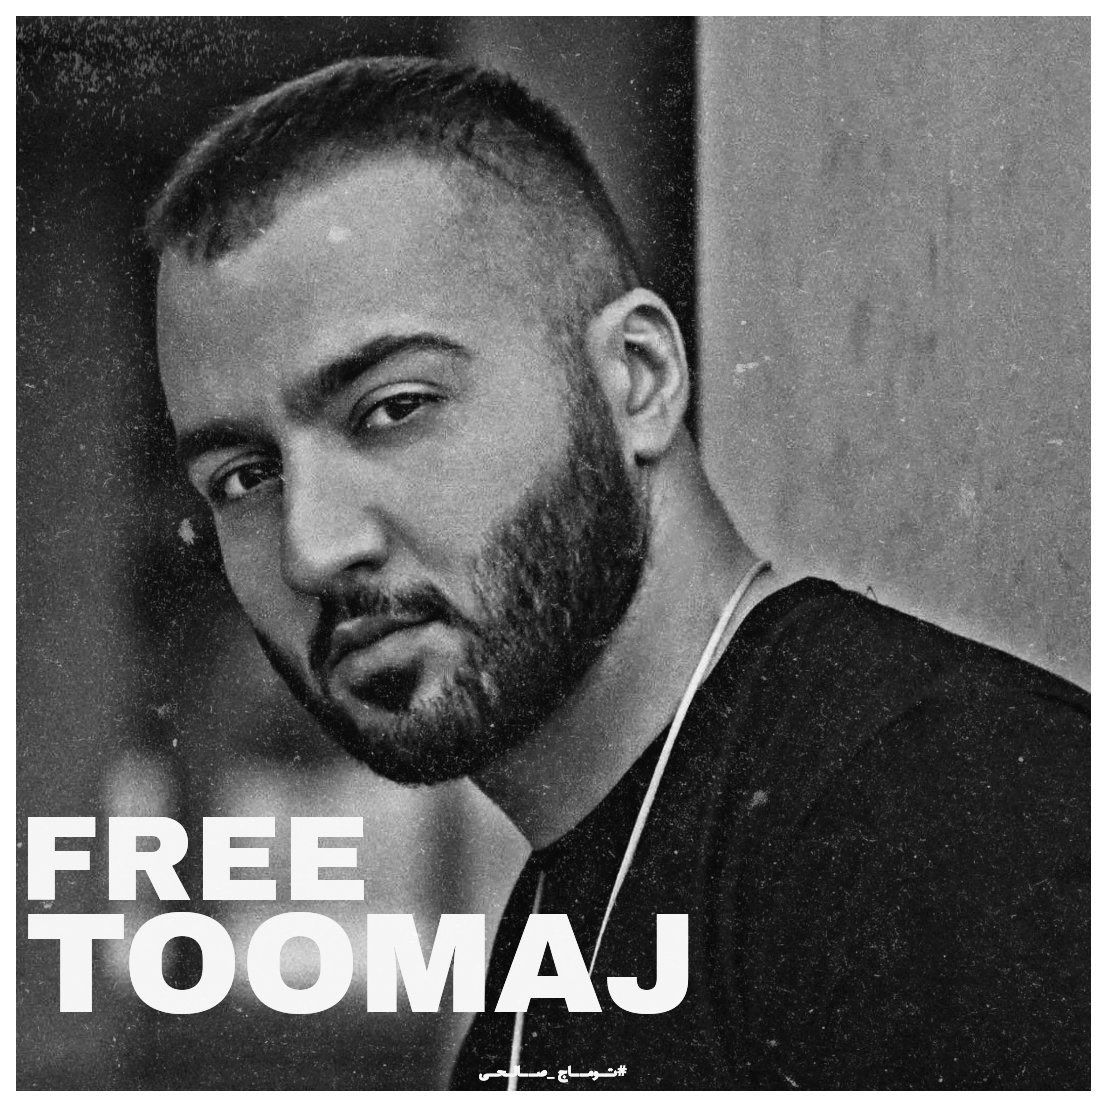 🚨🚨🚨
Art is not a crime, and the artist is not a criminal!

Please be the voice of #ToomajSalehi, the beloved rapper who has been sentenced to death simply for speaking up for his people and using rap music as a form of protest!
#FreeToomaj